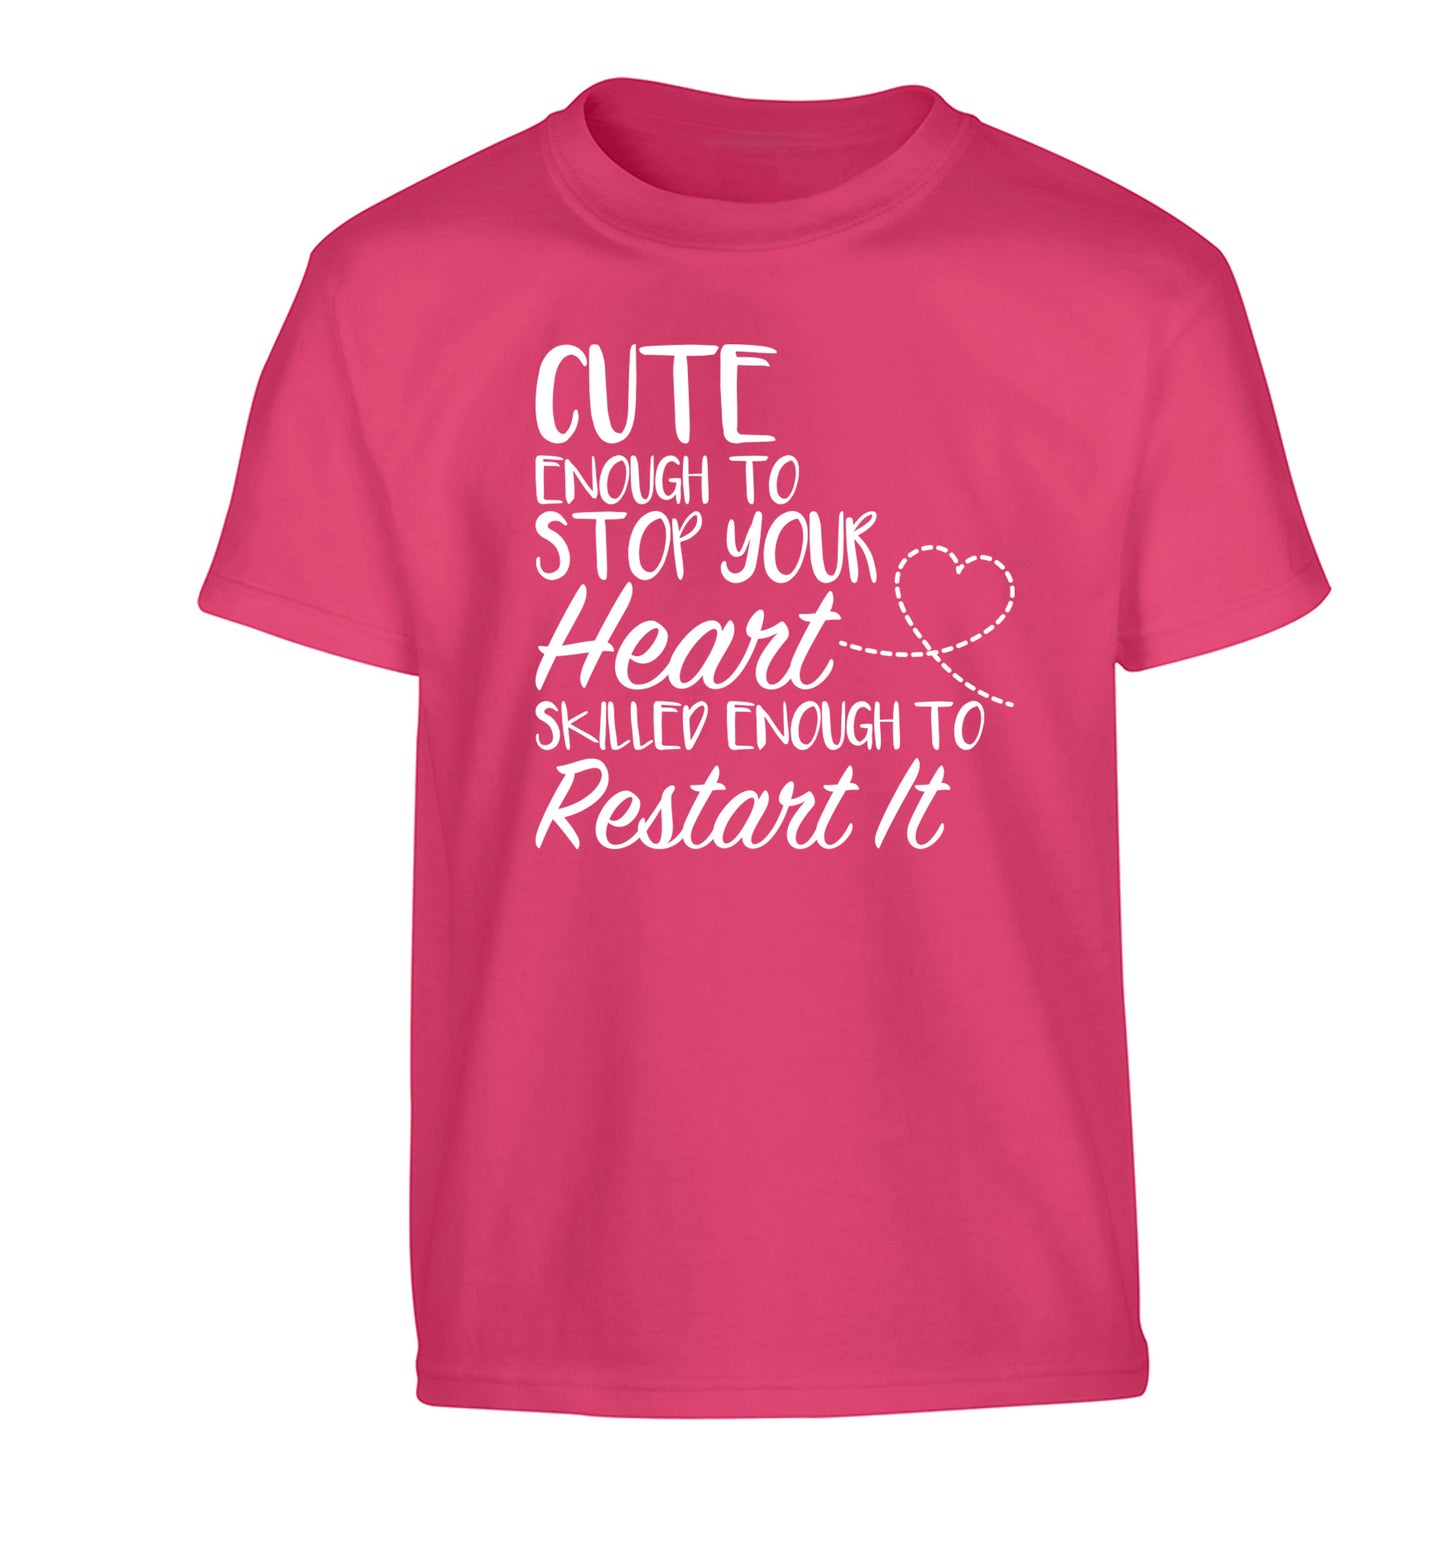 Cute enough to stop your heart skilled enough to restart it Children's pink Tshirt 12-13 Years